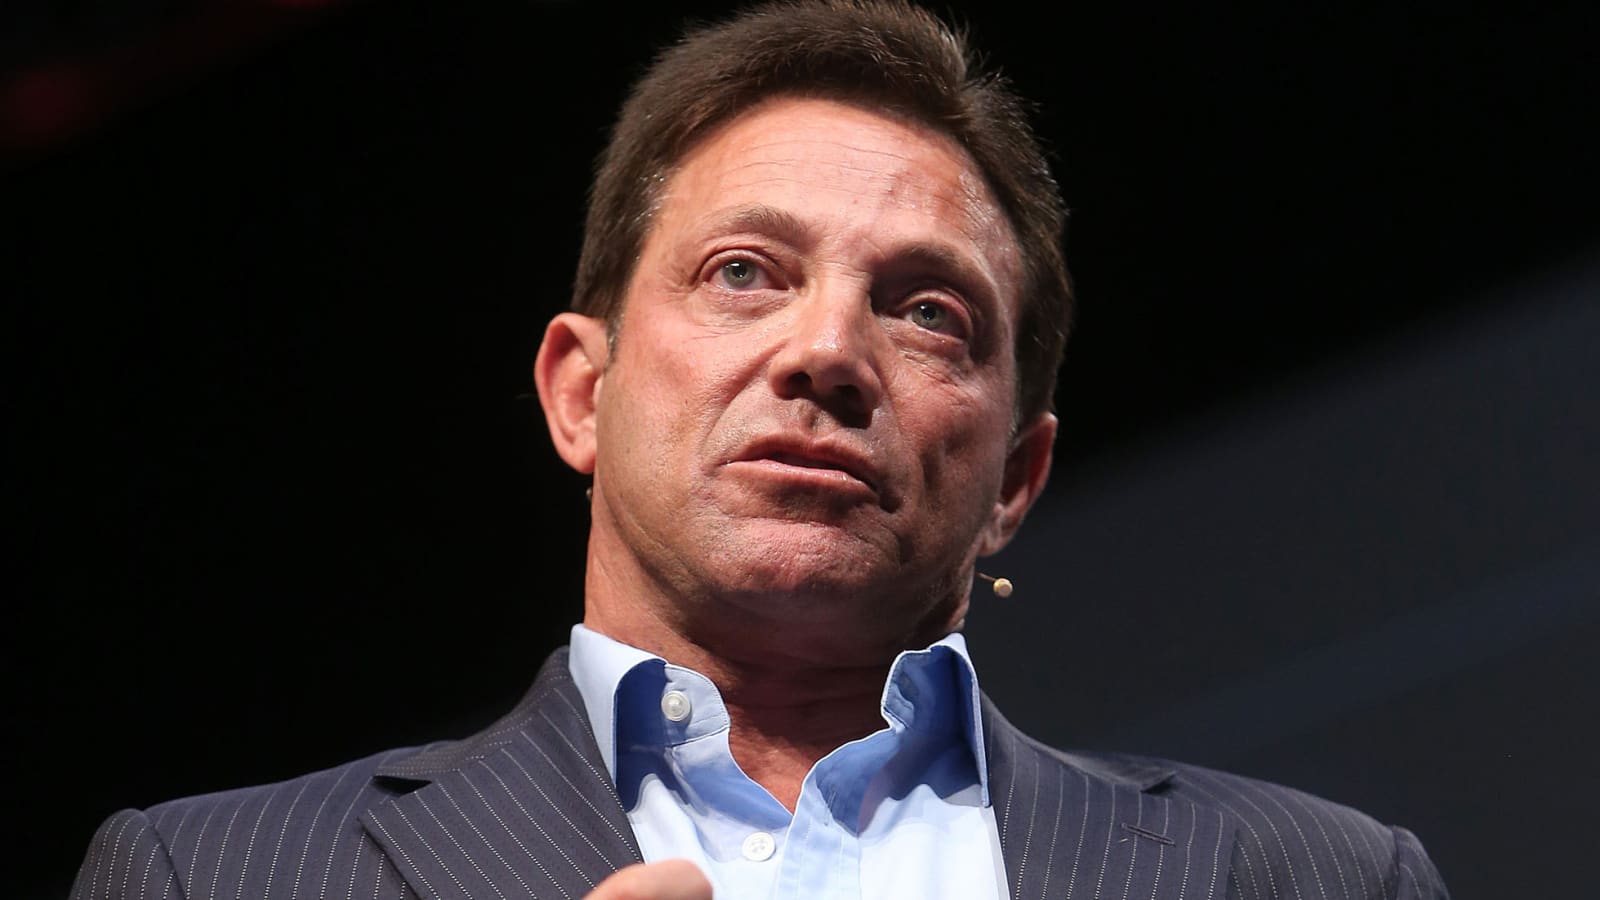 Wolf Of Wall Street Belfort To Surrender More Profits To Victims